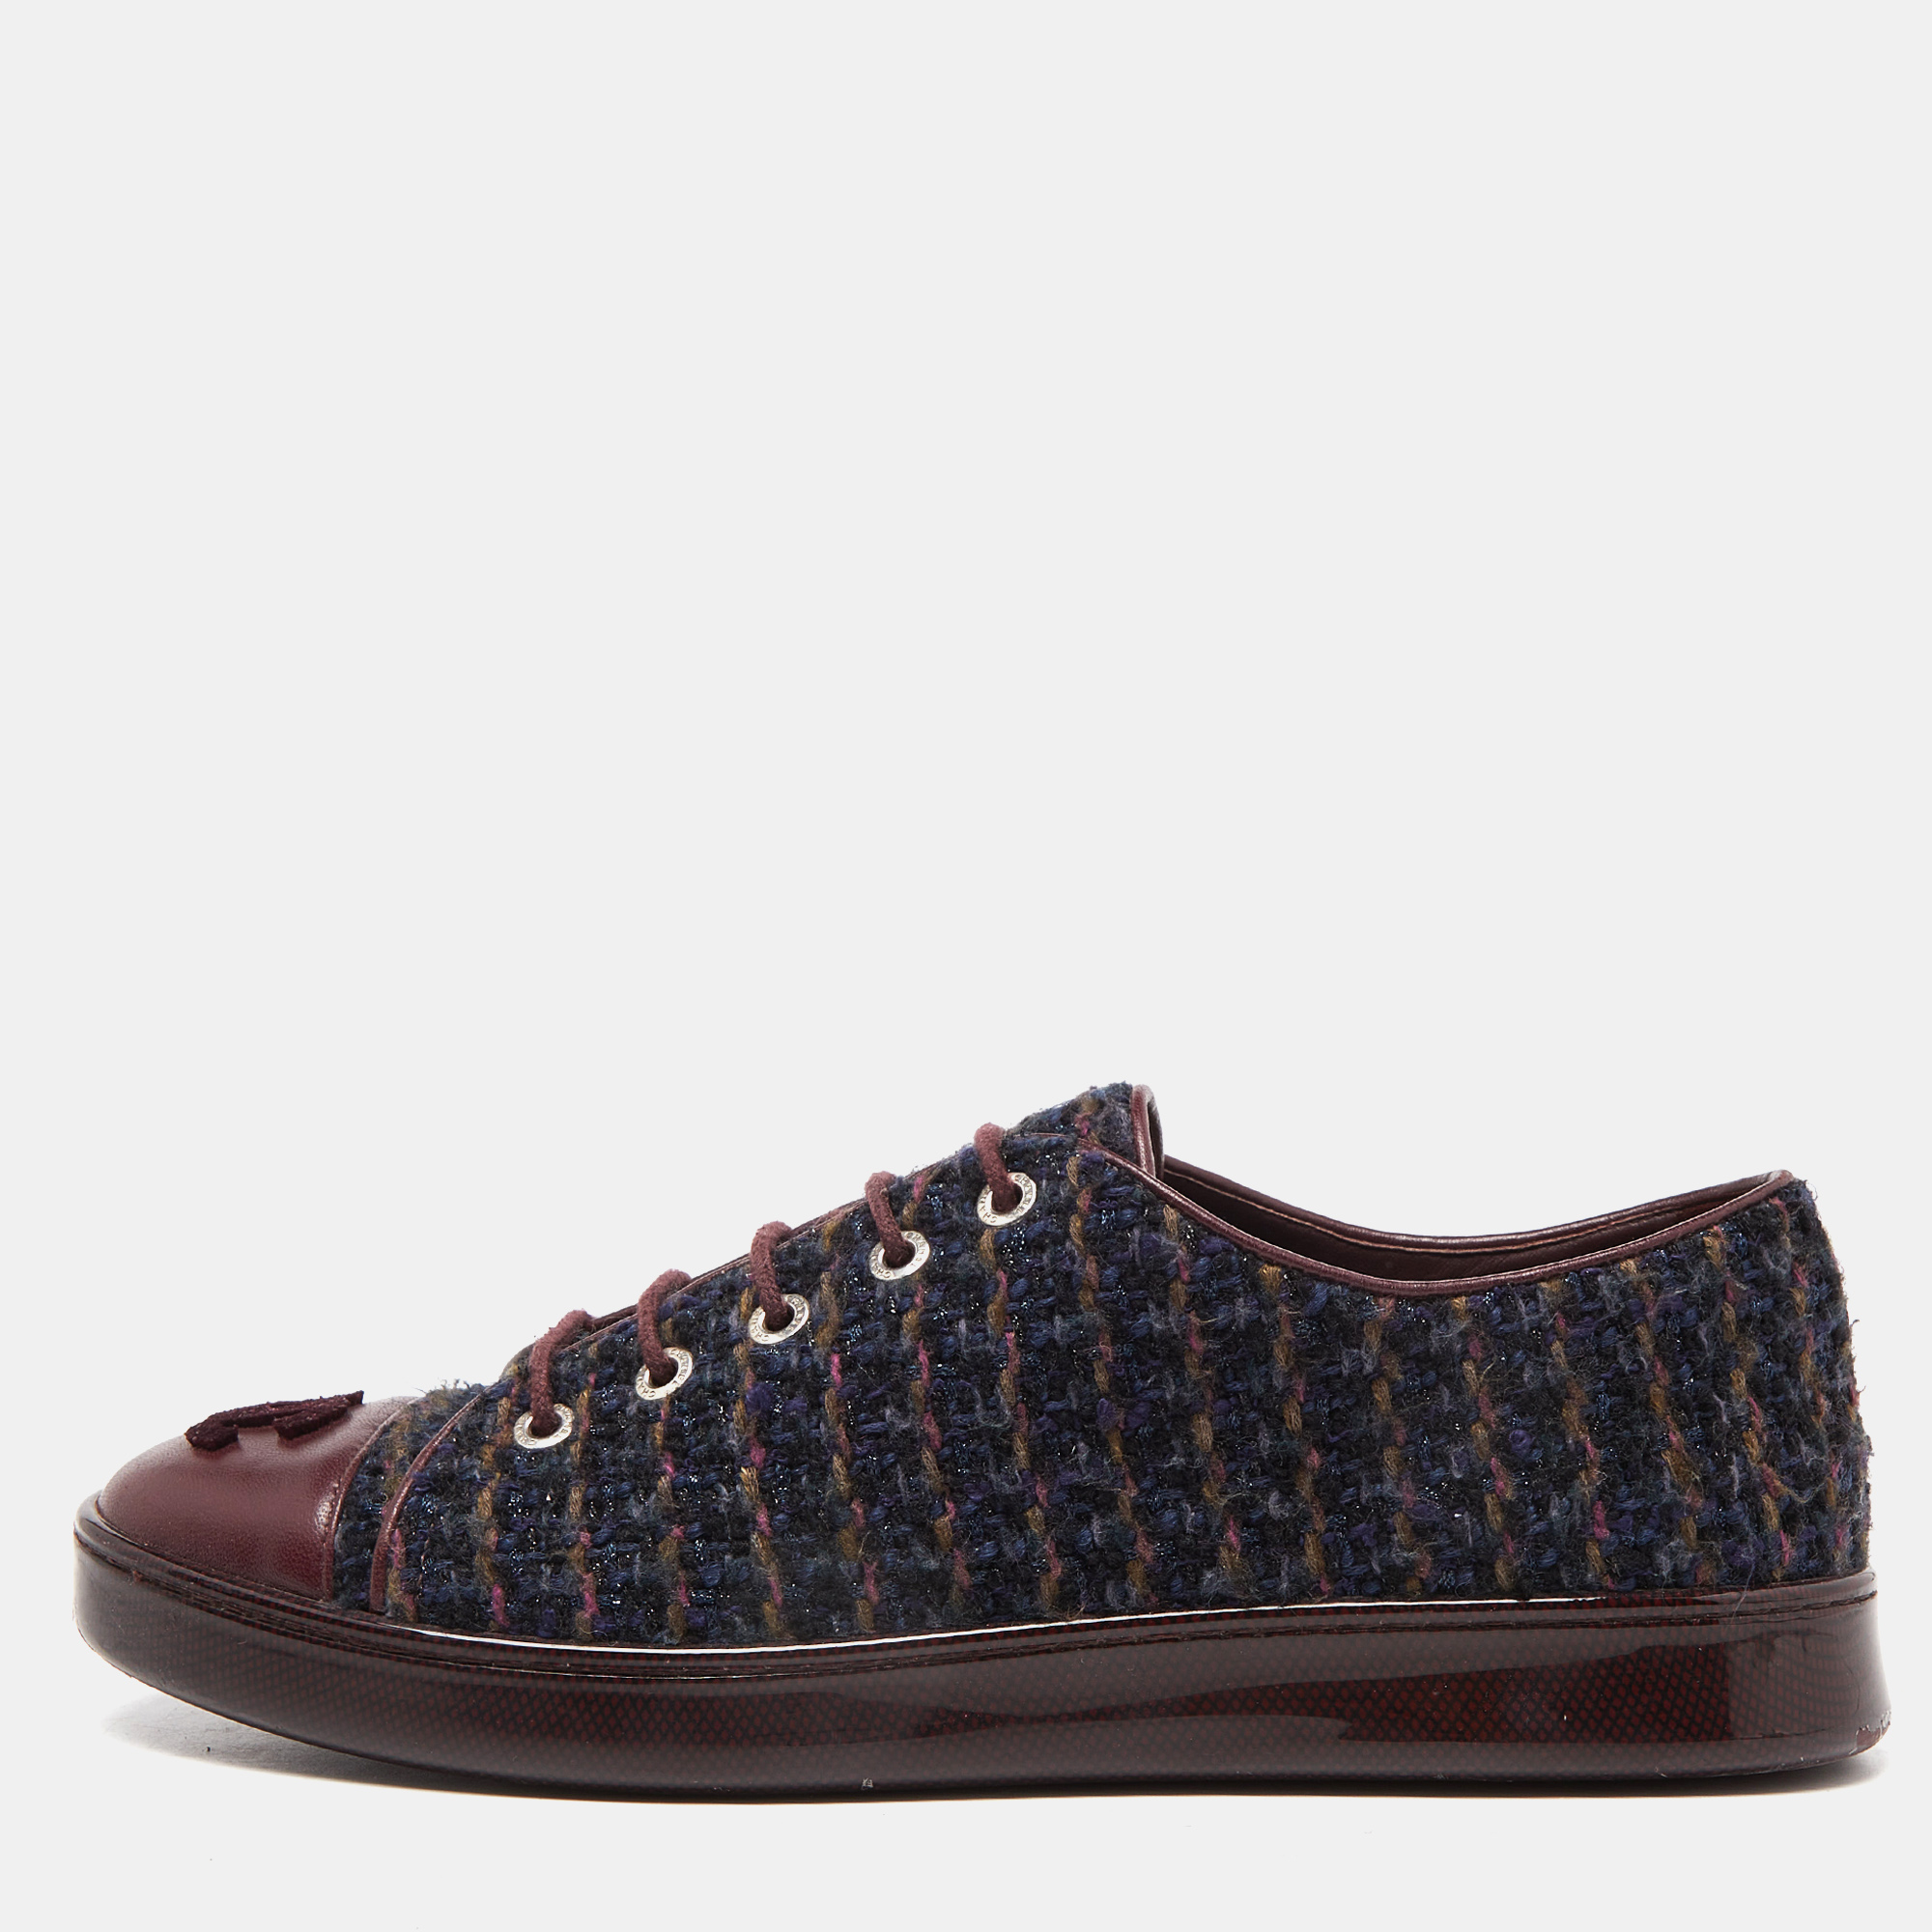 Pre-owned Chanel Burgundy Tweed And Leather Cc Cap Toe Low Top Sneakers Size 37.5